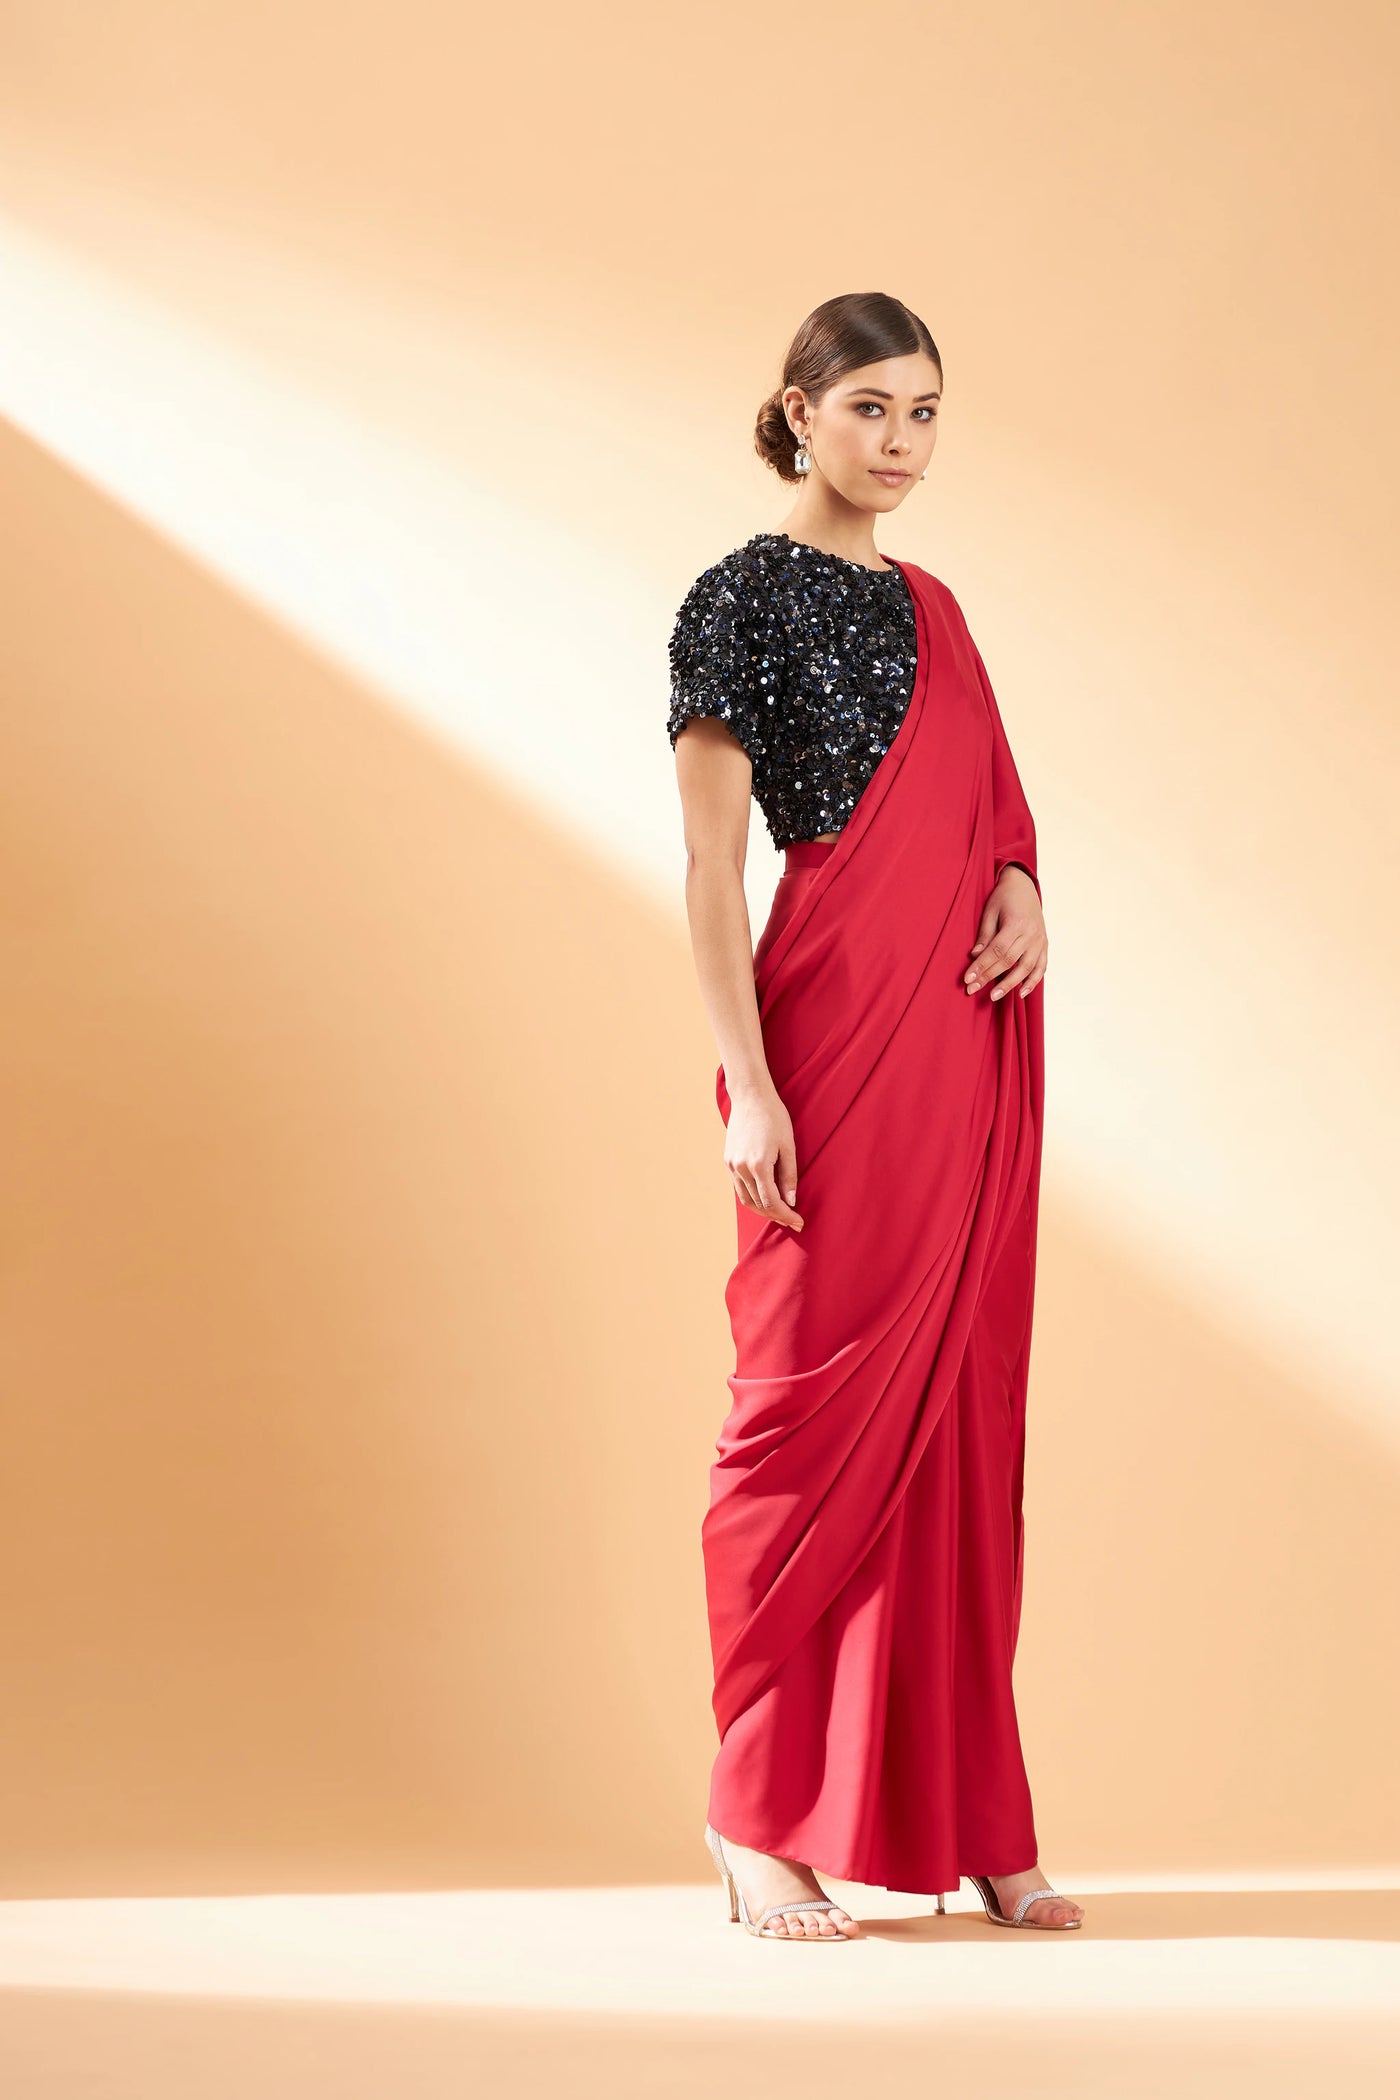 Red Crystal Draped Saree Indian Clothing in Denver, CO, Aurora, CO, Boulder, CO, Fort Collins, CO, Colorado Springs, CO, Parker, CO, Highlands Ranch, CO, Cherry Creek, CO, Centennial, CO, and Longmont, CO. NATIONWIDE SHIPPING USA- India Fashion X